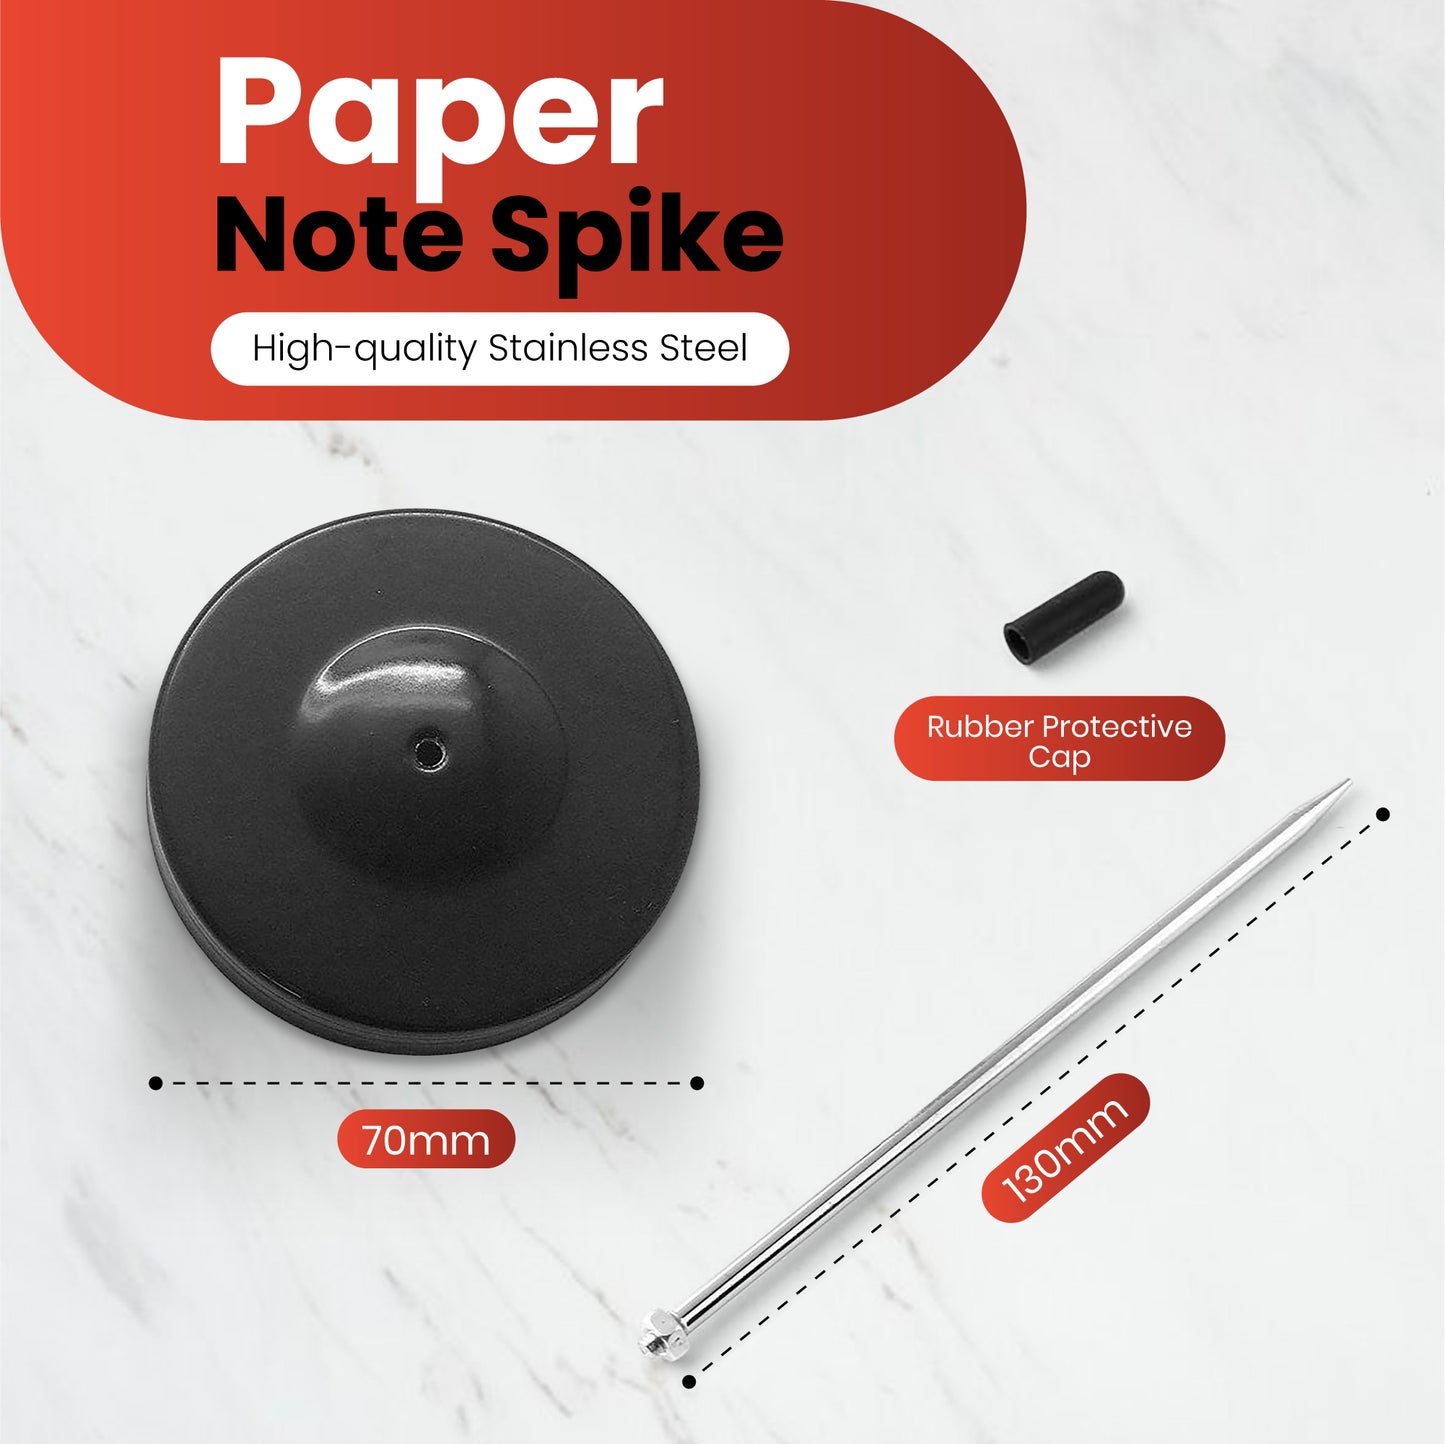 Paper Note Spike with Safety Tip - File Receipts Bills Invoices etc.